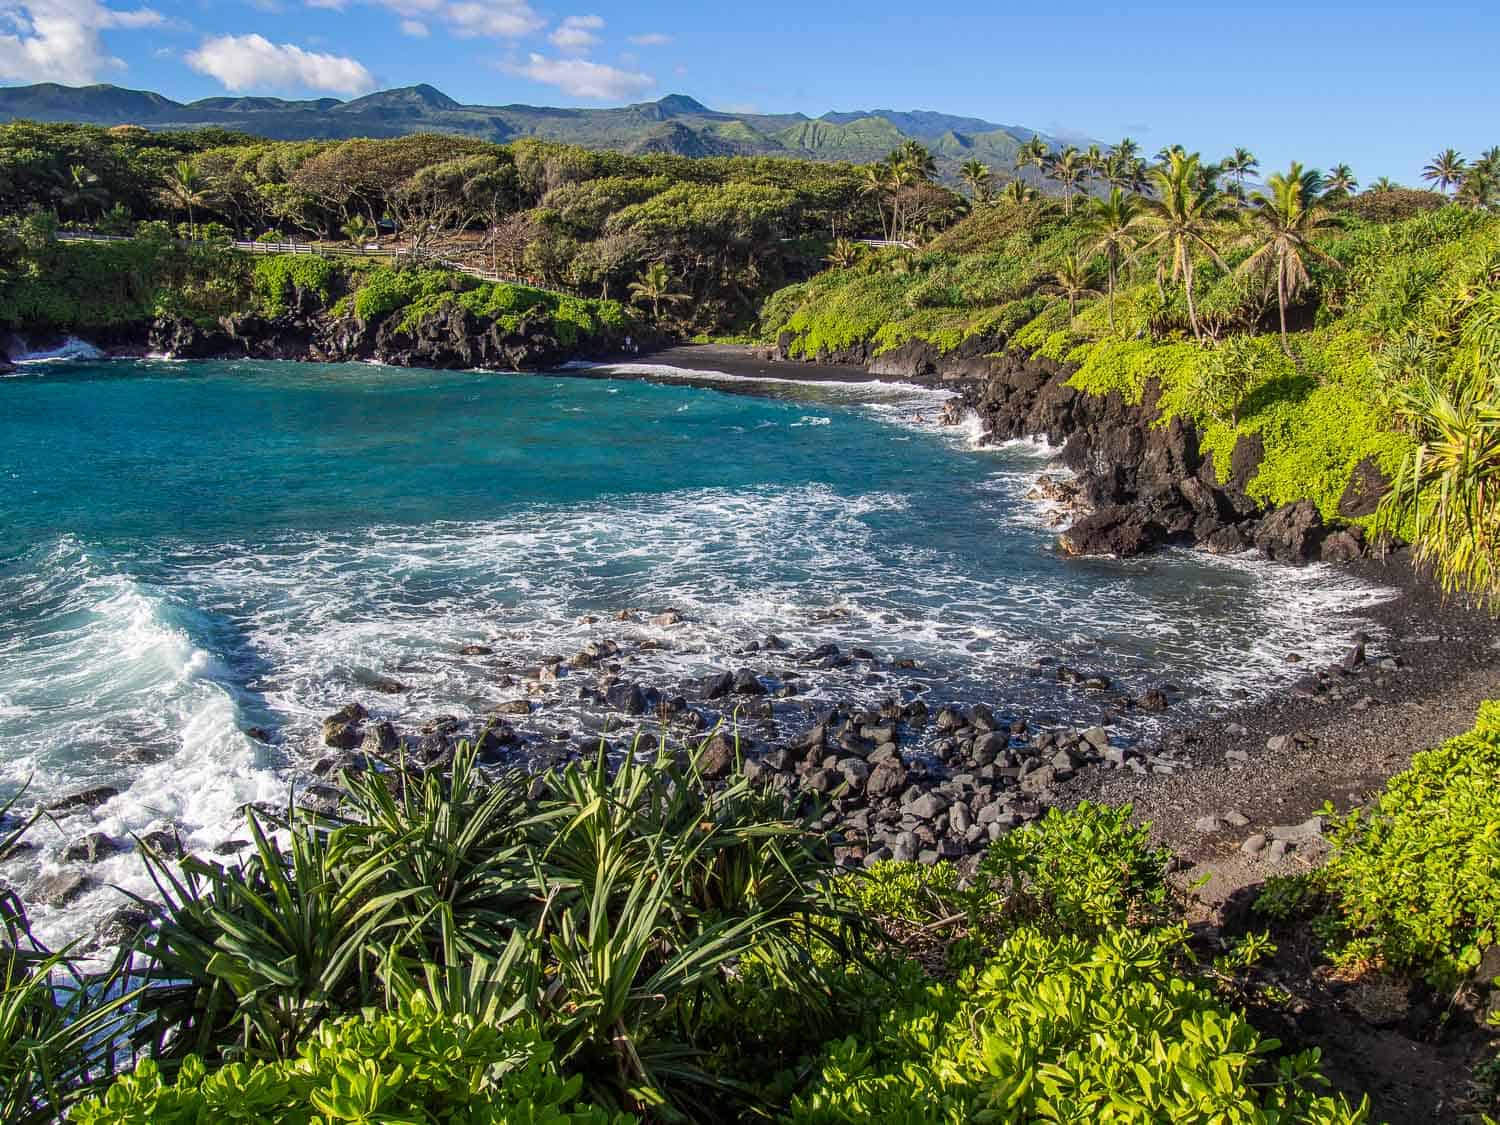 The black sand beach at Waianapanapa State Park, one of the best road to Hana stops on the island of Maui in Hawaii